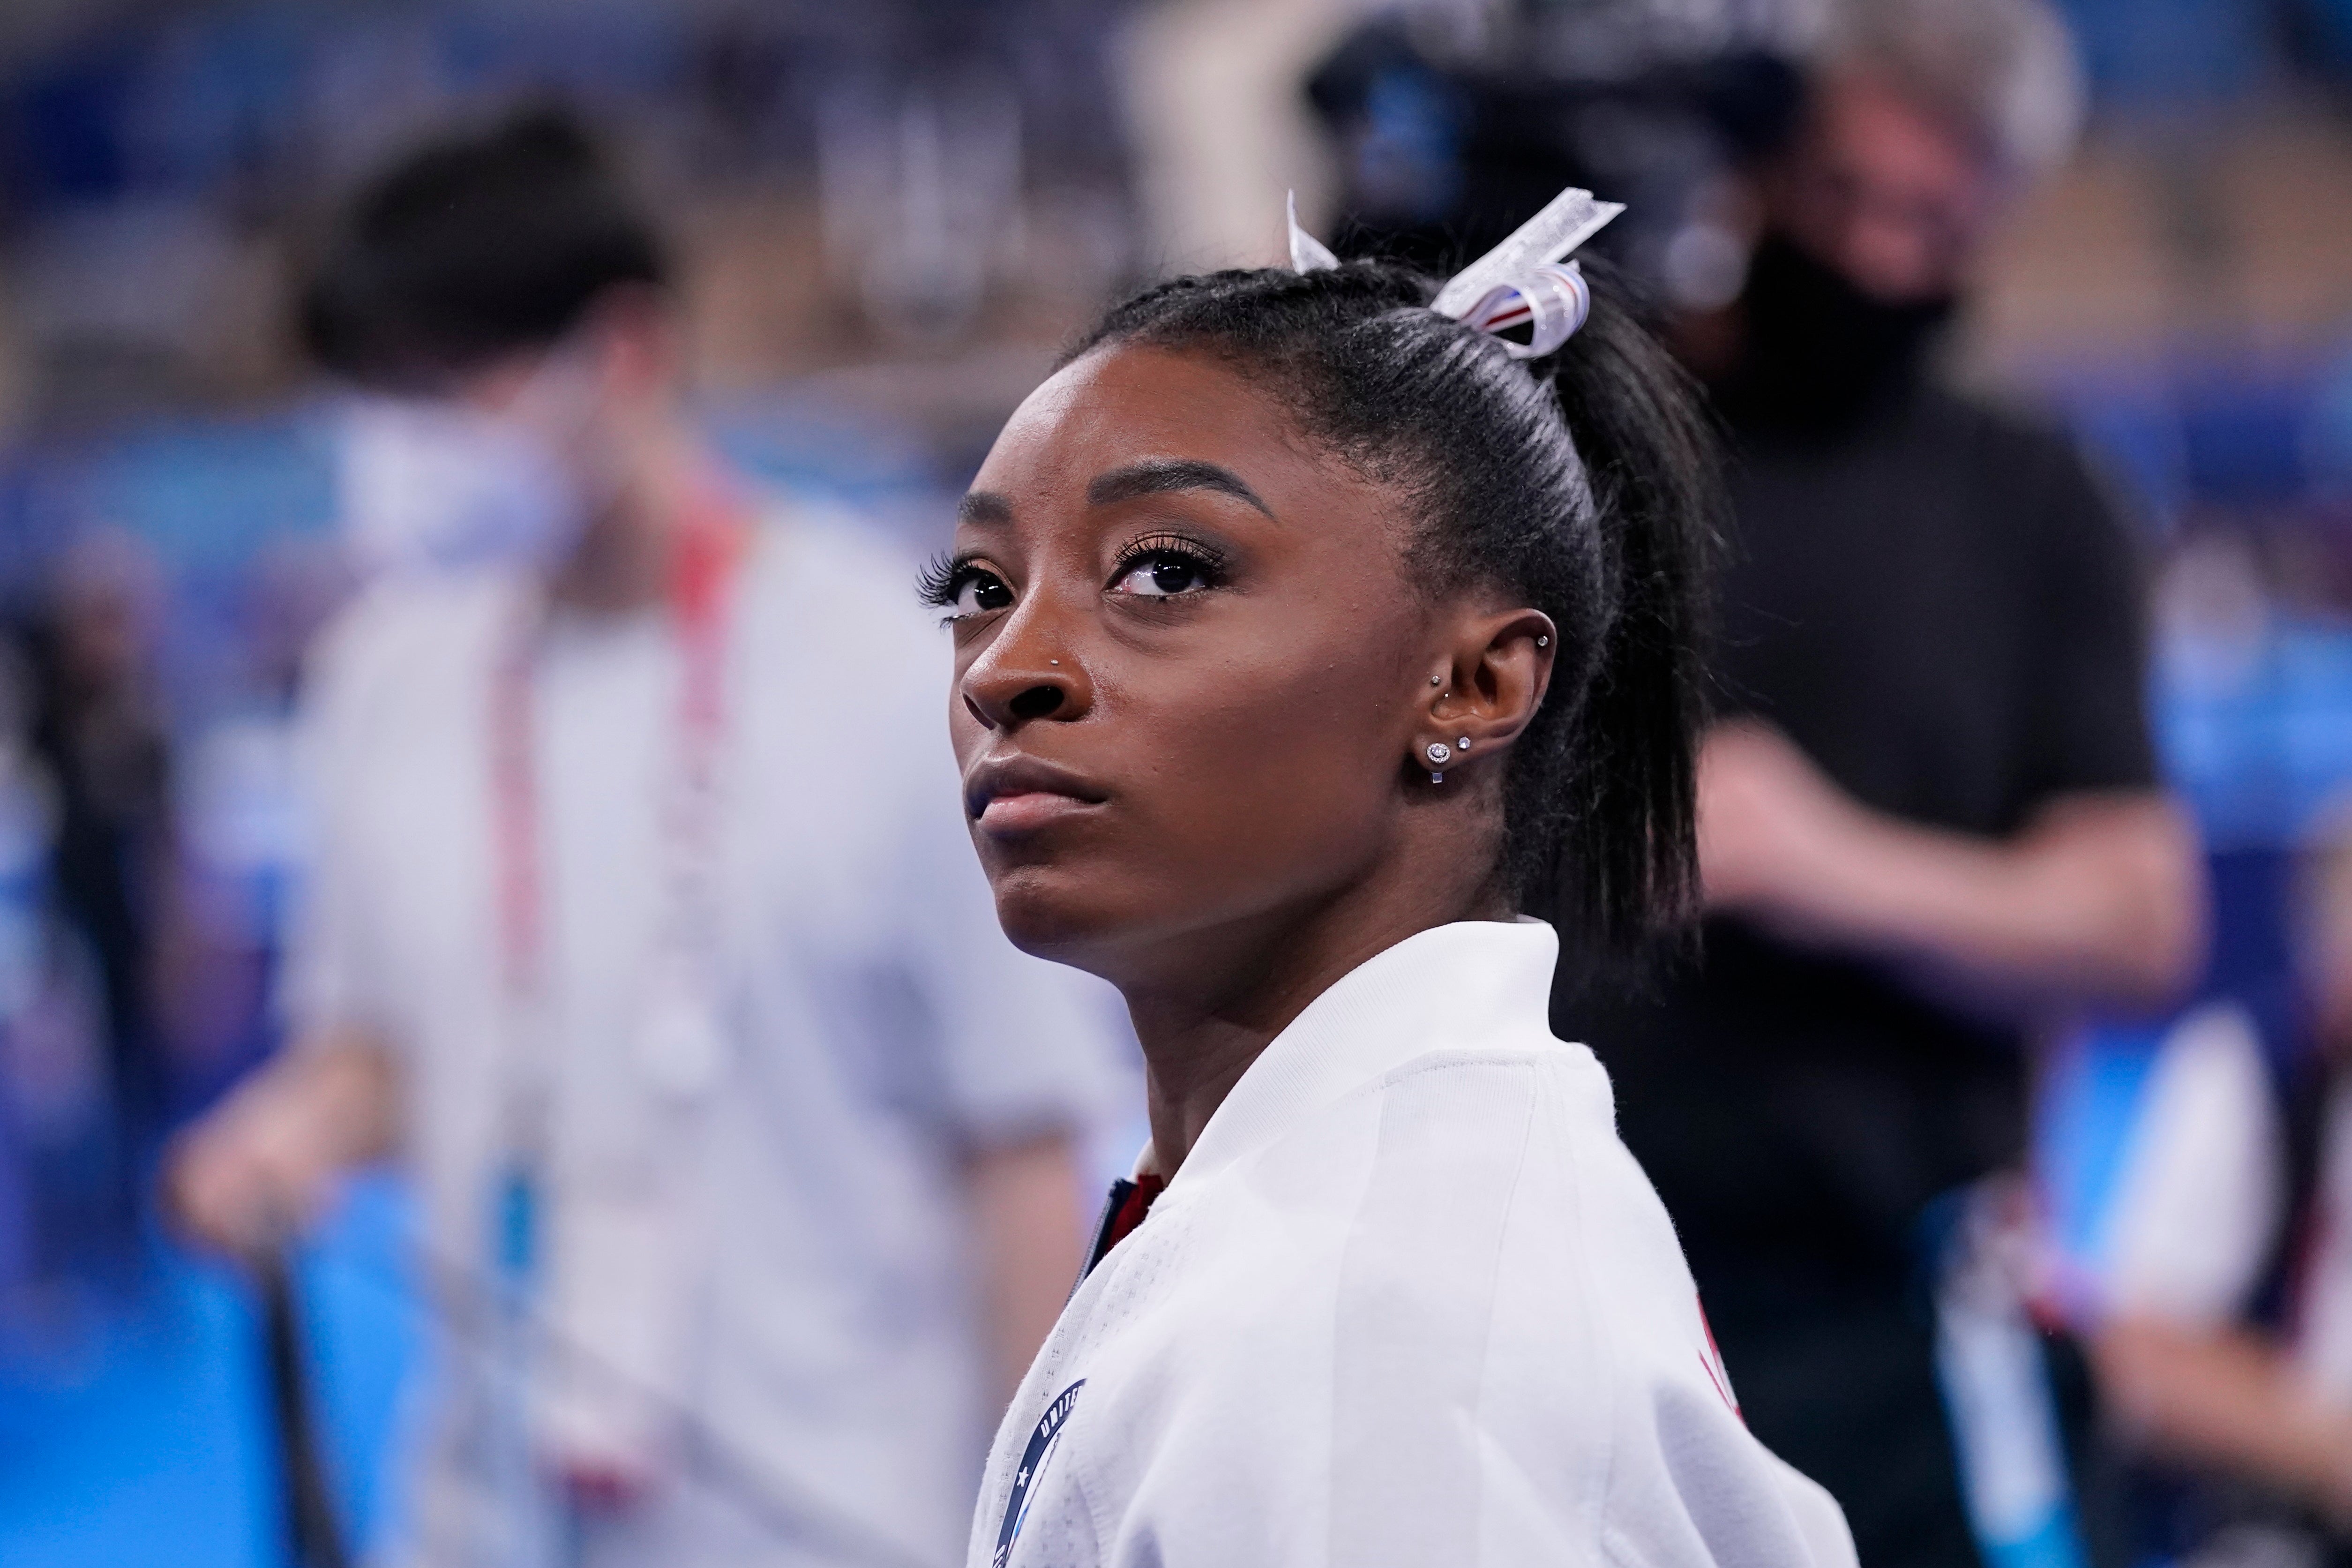 Simone Biles’s boyfriend has expressed his support for the gymnast, who withdrew from the Tokyo Olympics